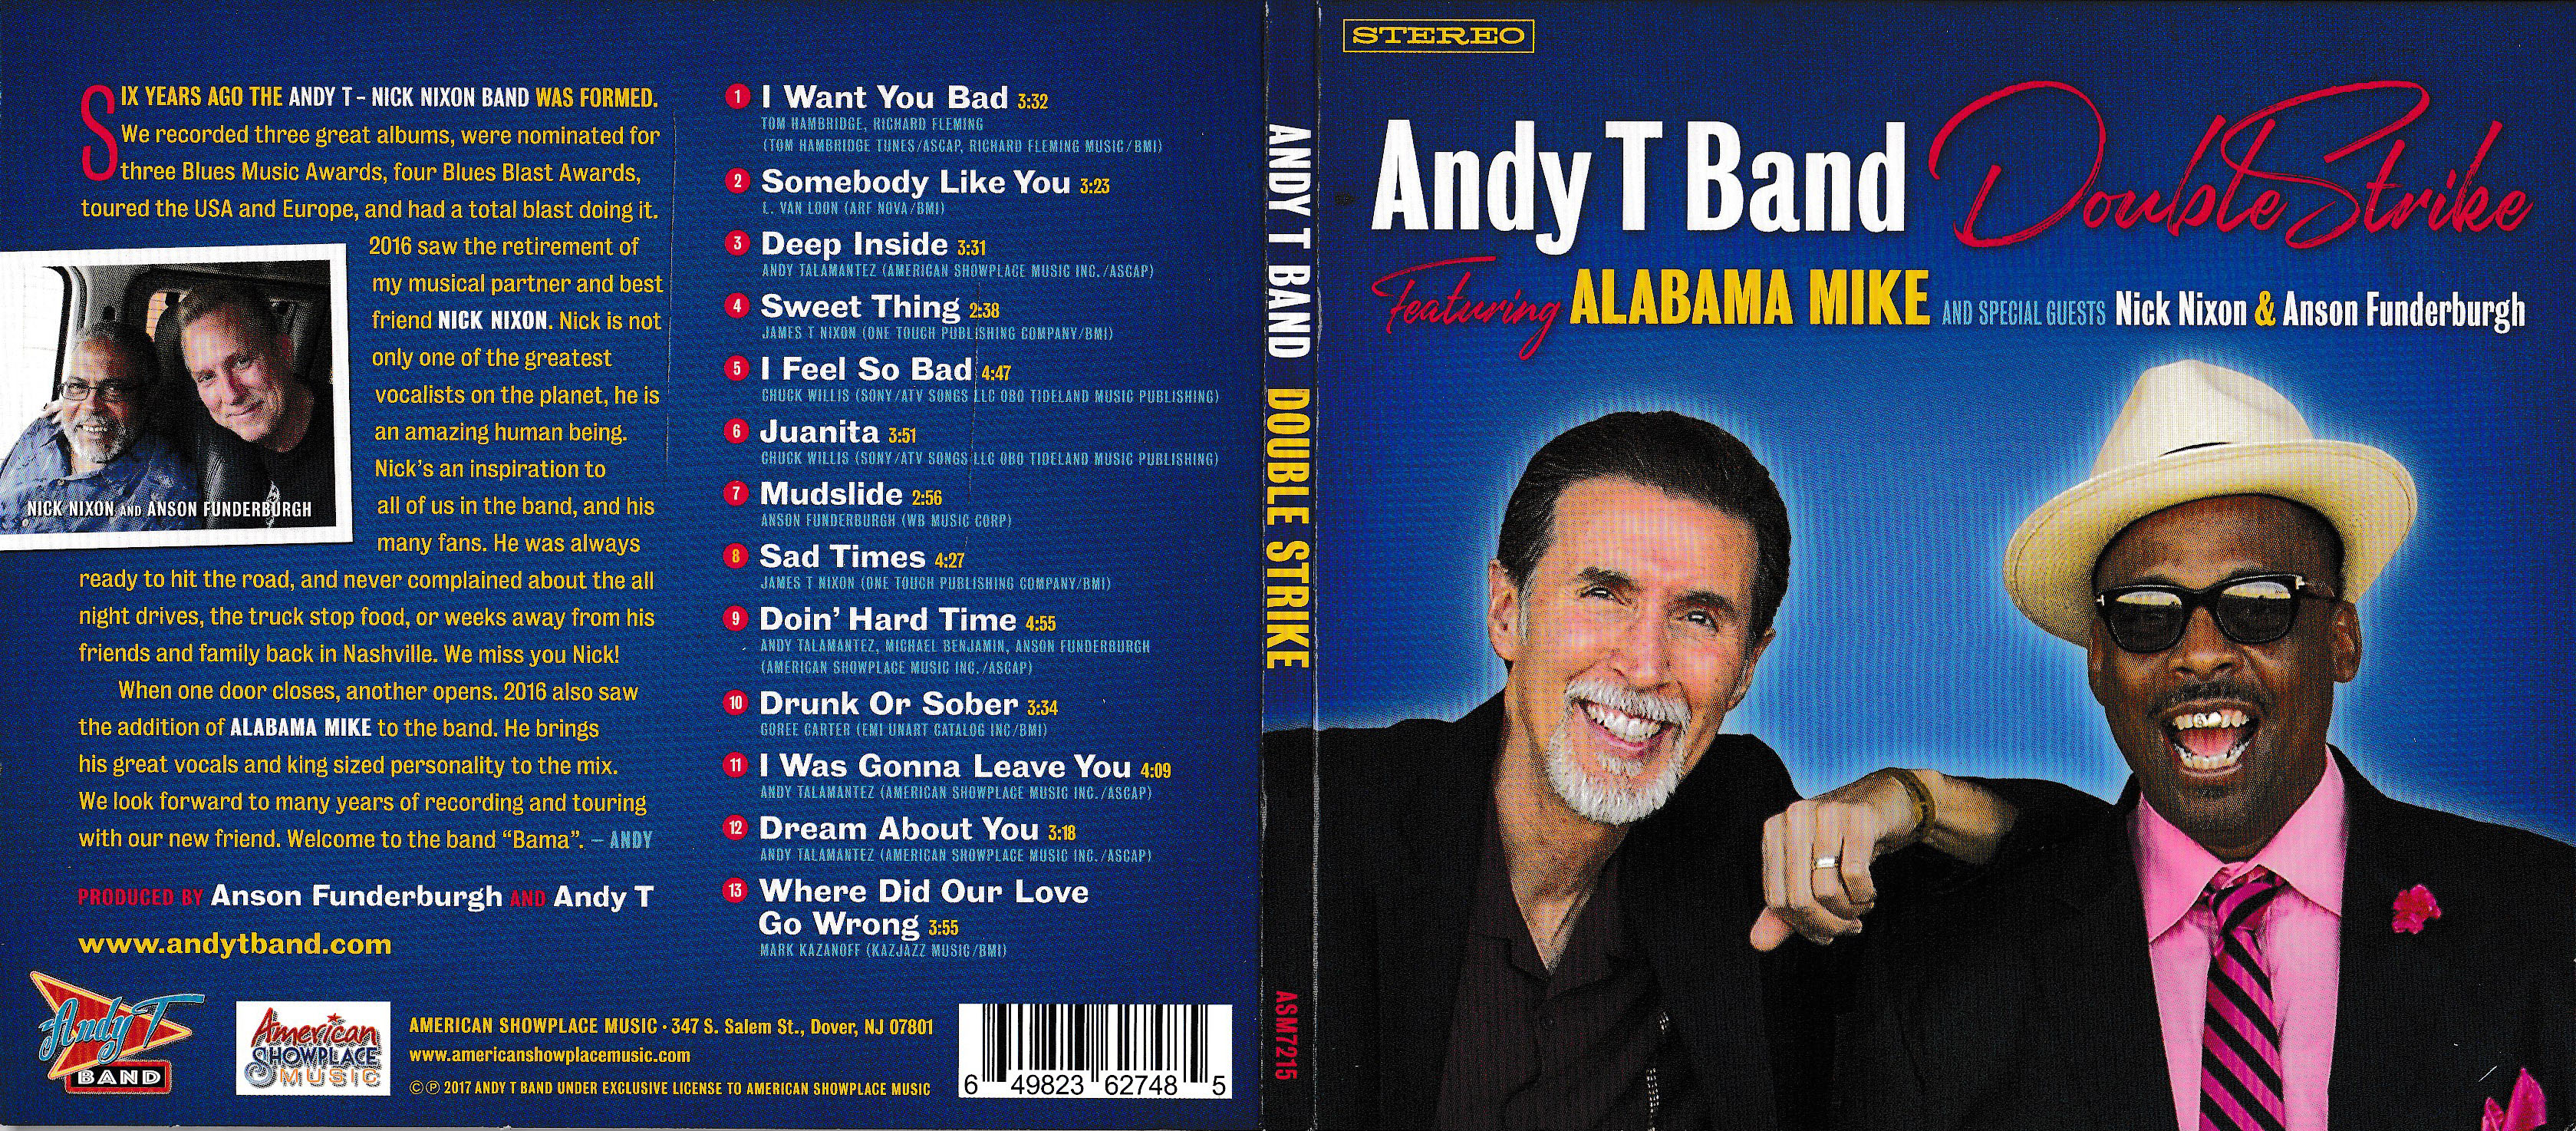 Andy T Band Featuring Alabama Mike - Double Strike - Front